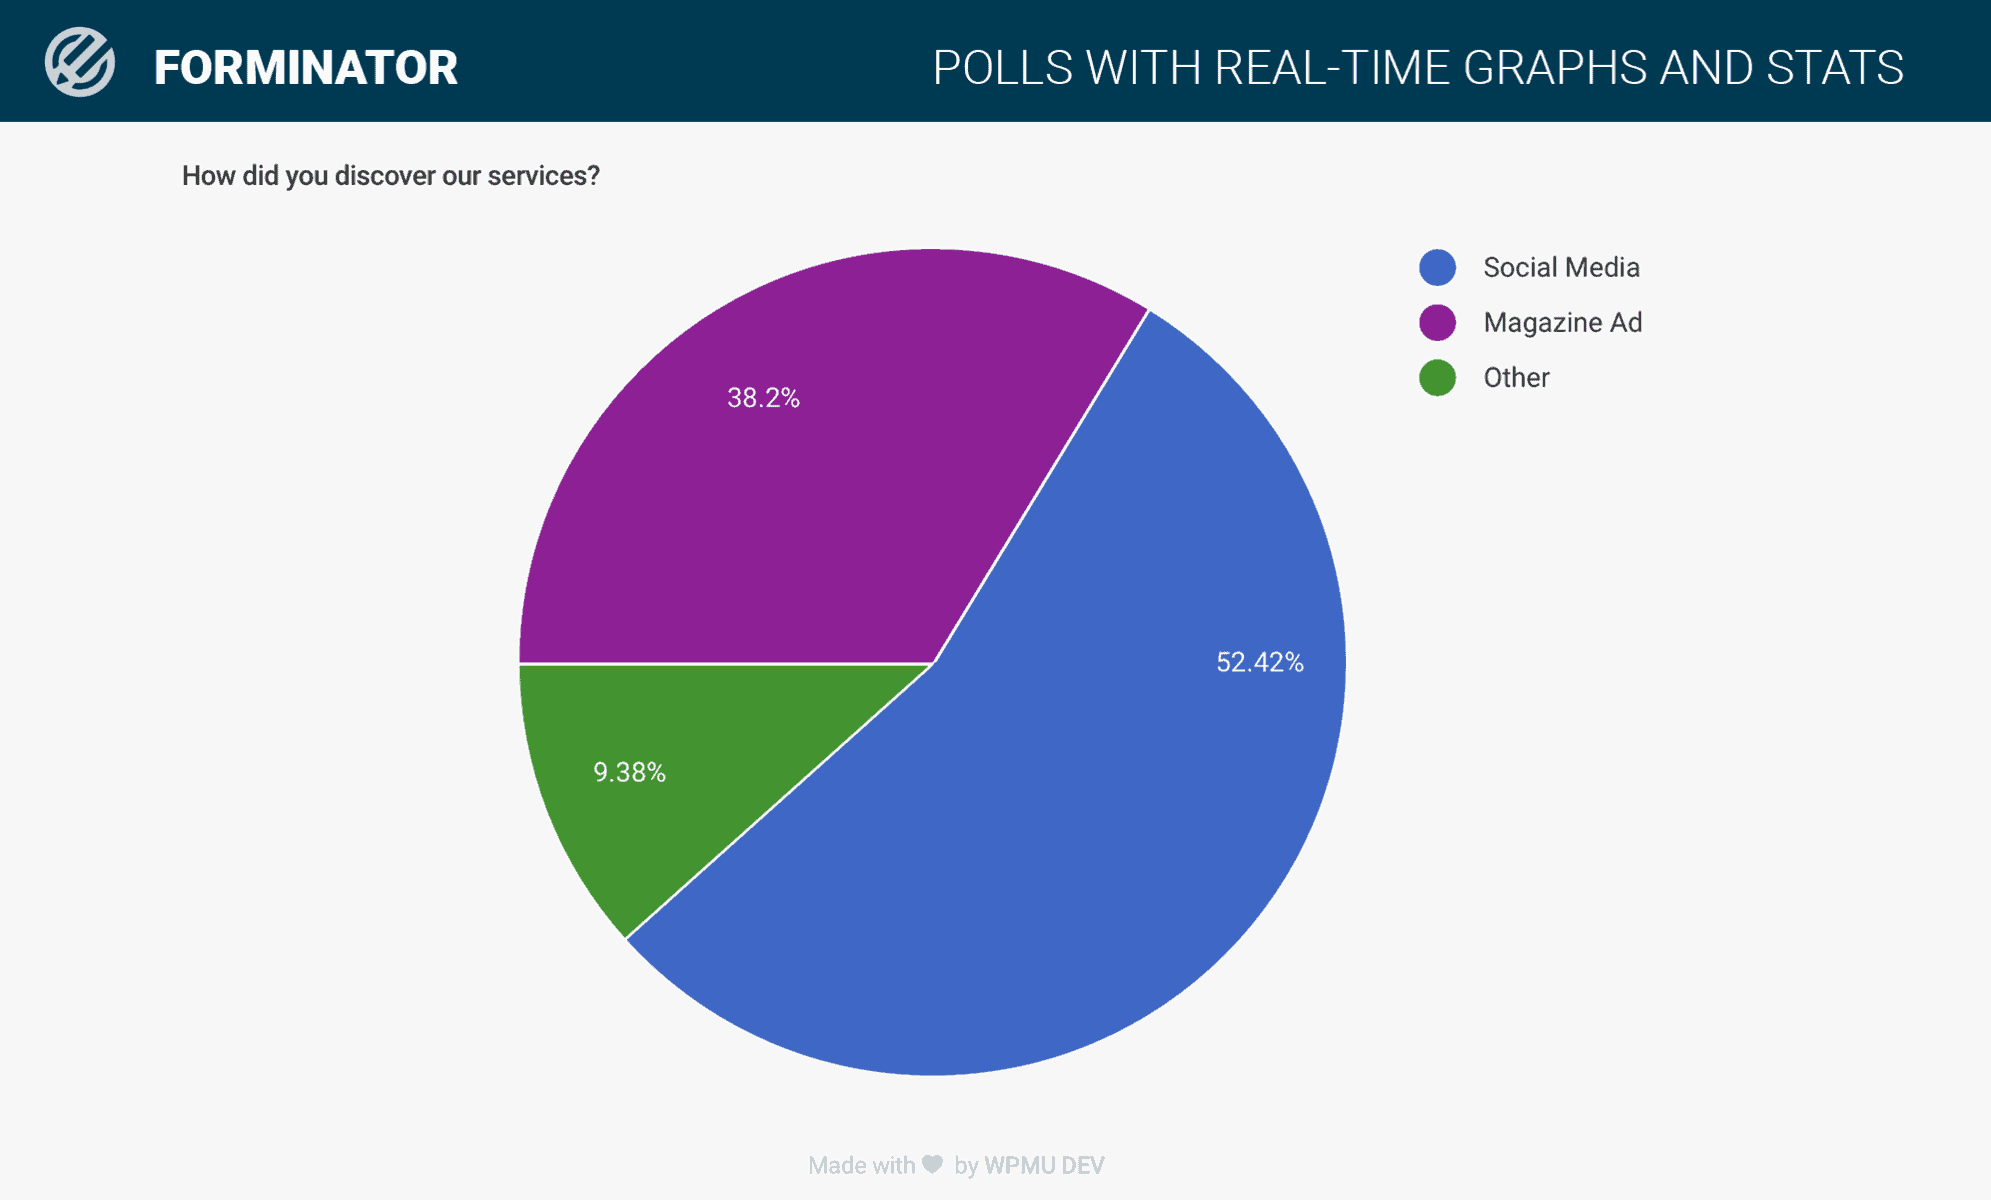 Poll results